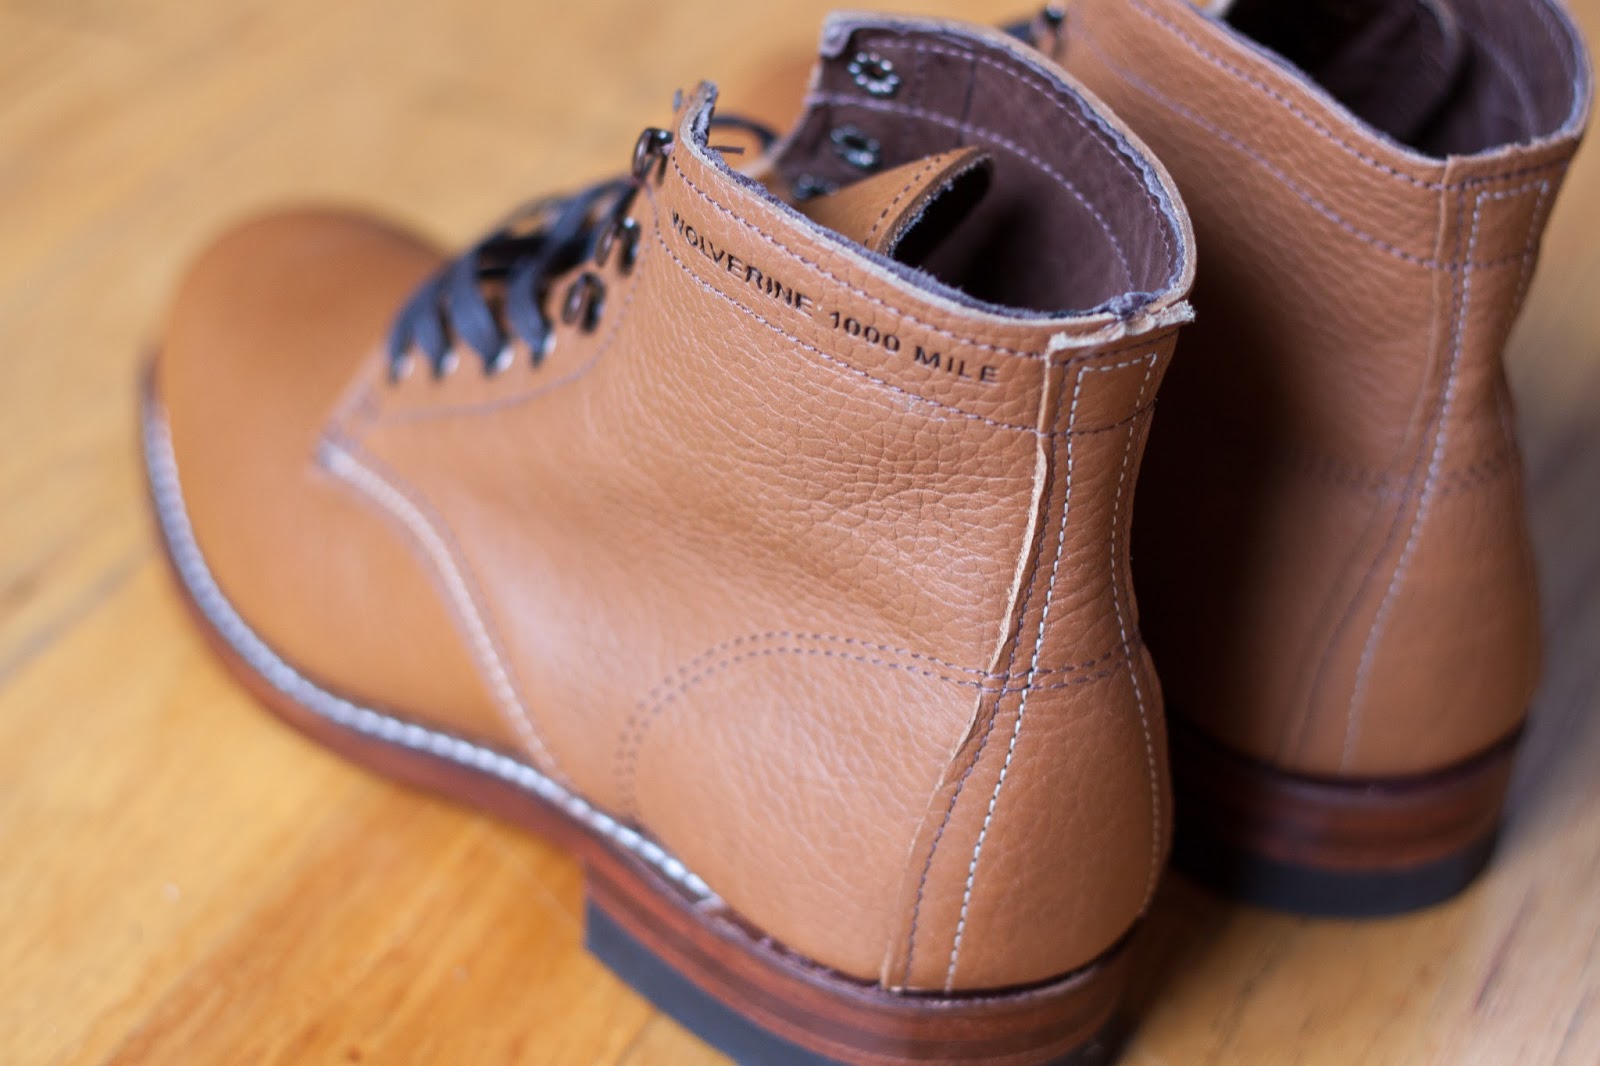 In Review: Wolverine Centennial 1000 Mile Boot